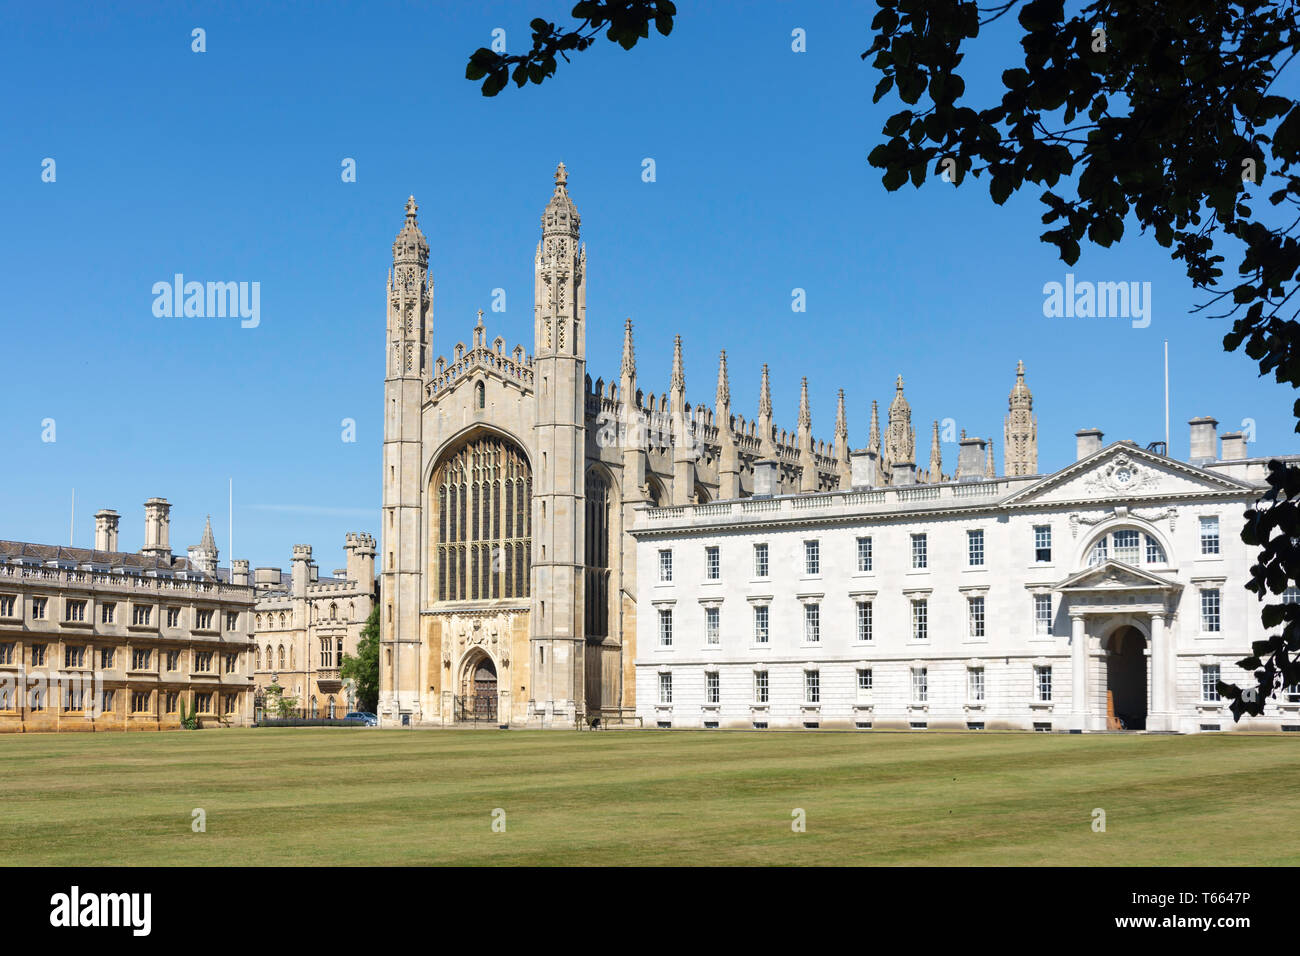 King's College Chapel and the Gibbs' Building, King's College, Cambridge, Cambridgeshire, England, United Kingdom Stock Photo